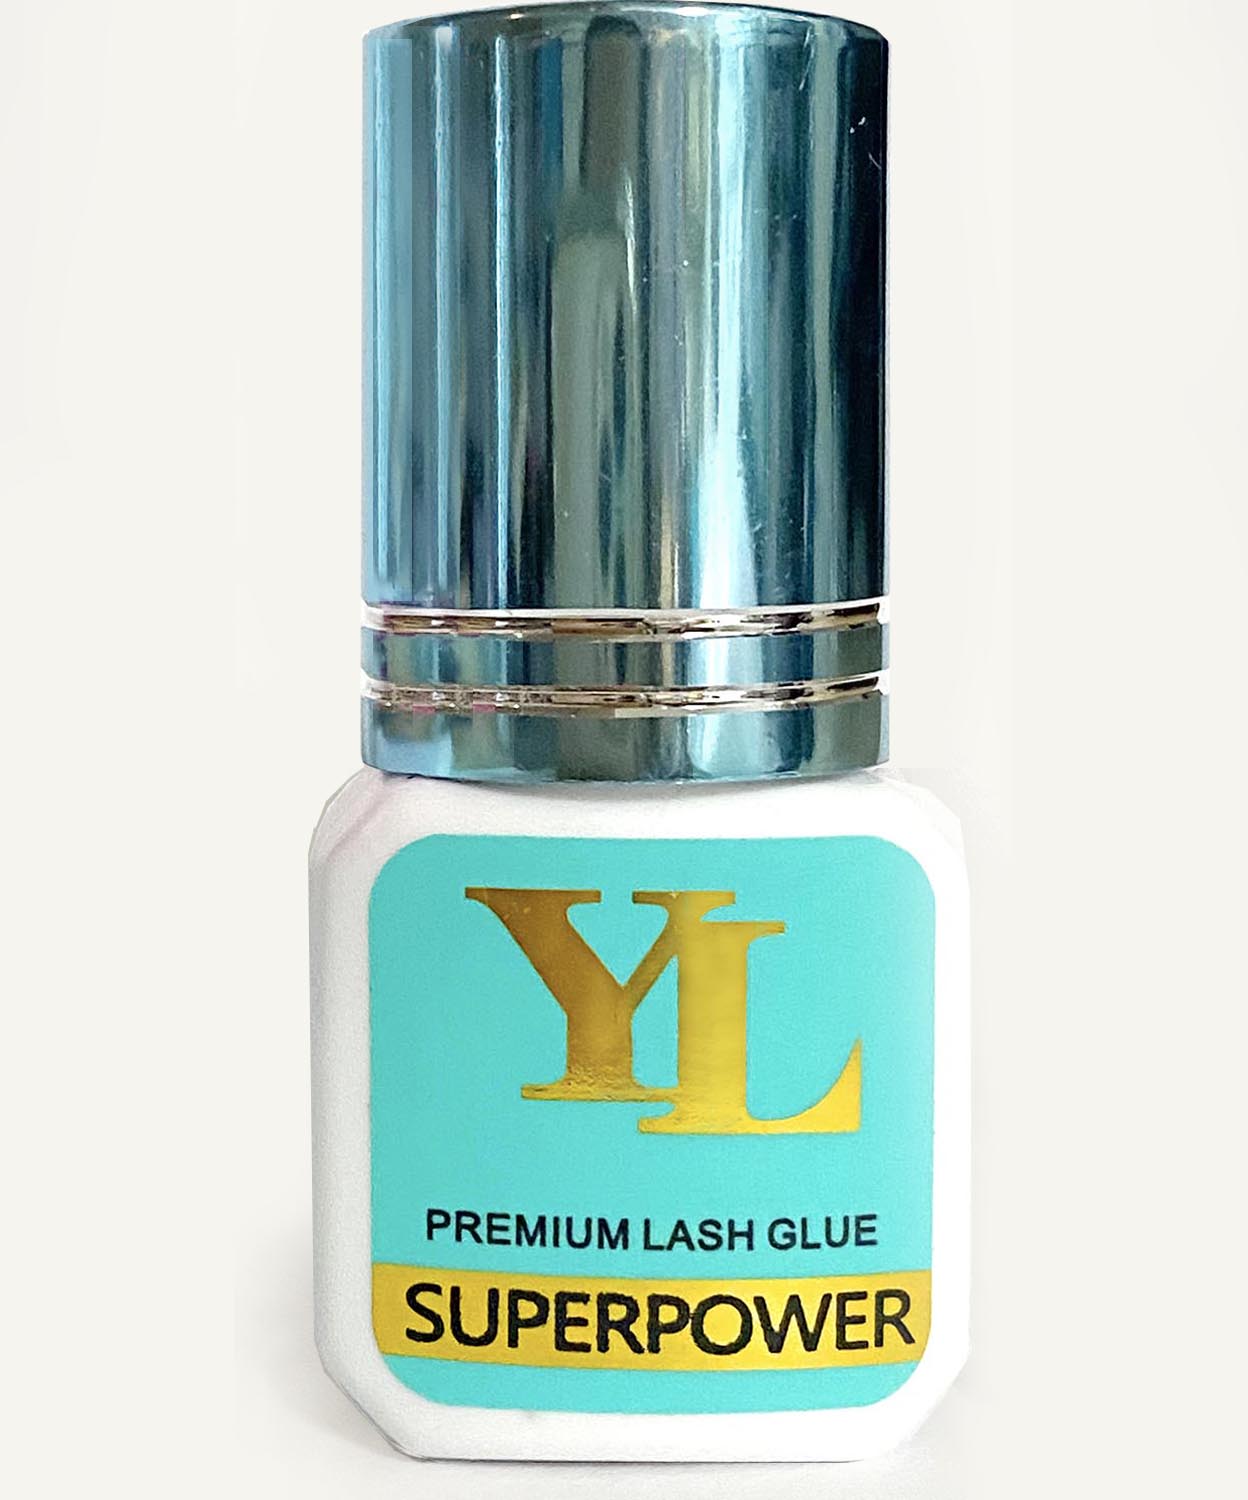 SUPERPOWER Black 0.5 to 1 Second FAST Drying EXTRA STRONG / 8 Weeks Long Retention Glue 5ml Black【Made in Taiwan】